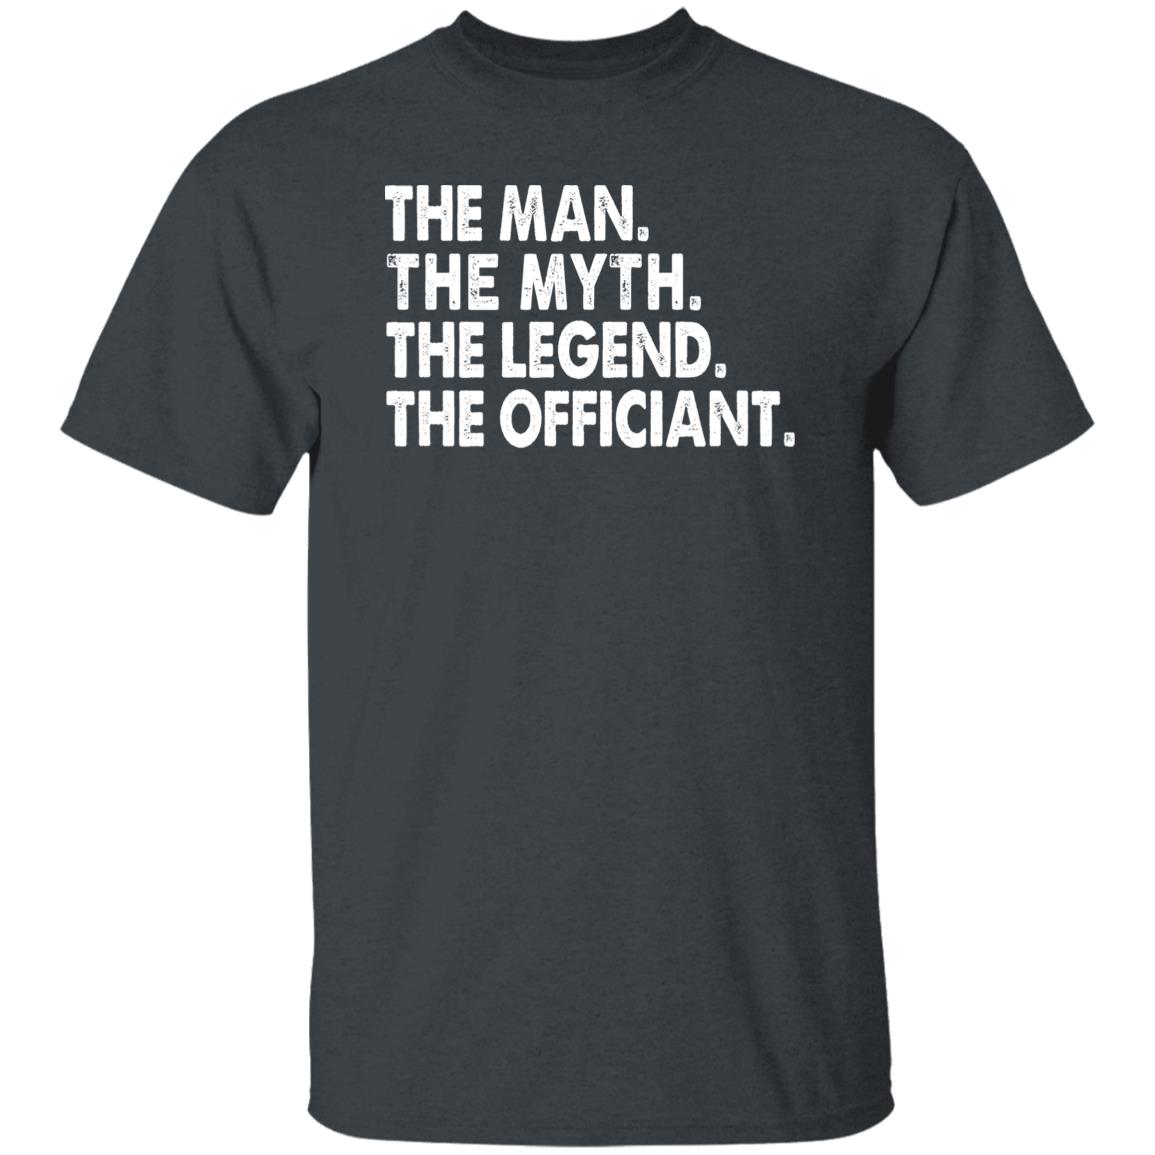 Wedding Gift T Shirt for Officiant The Man Myth Legend